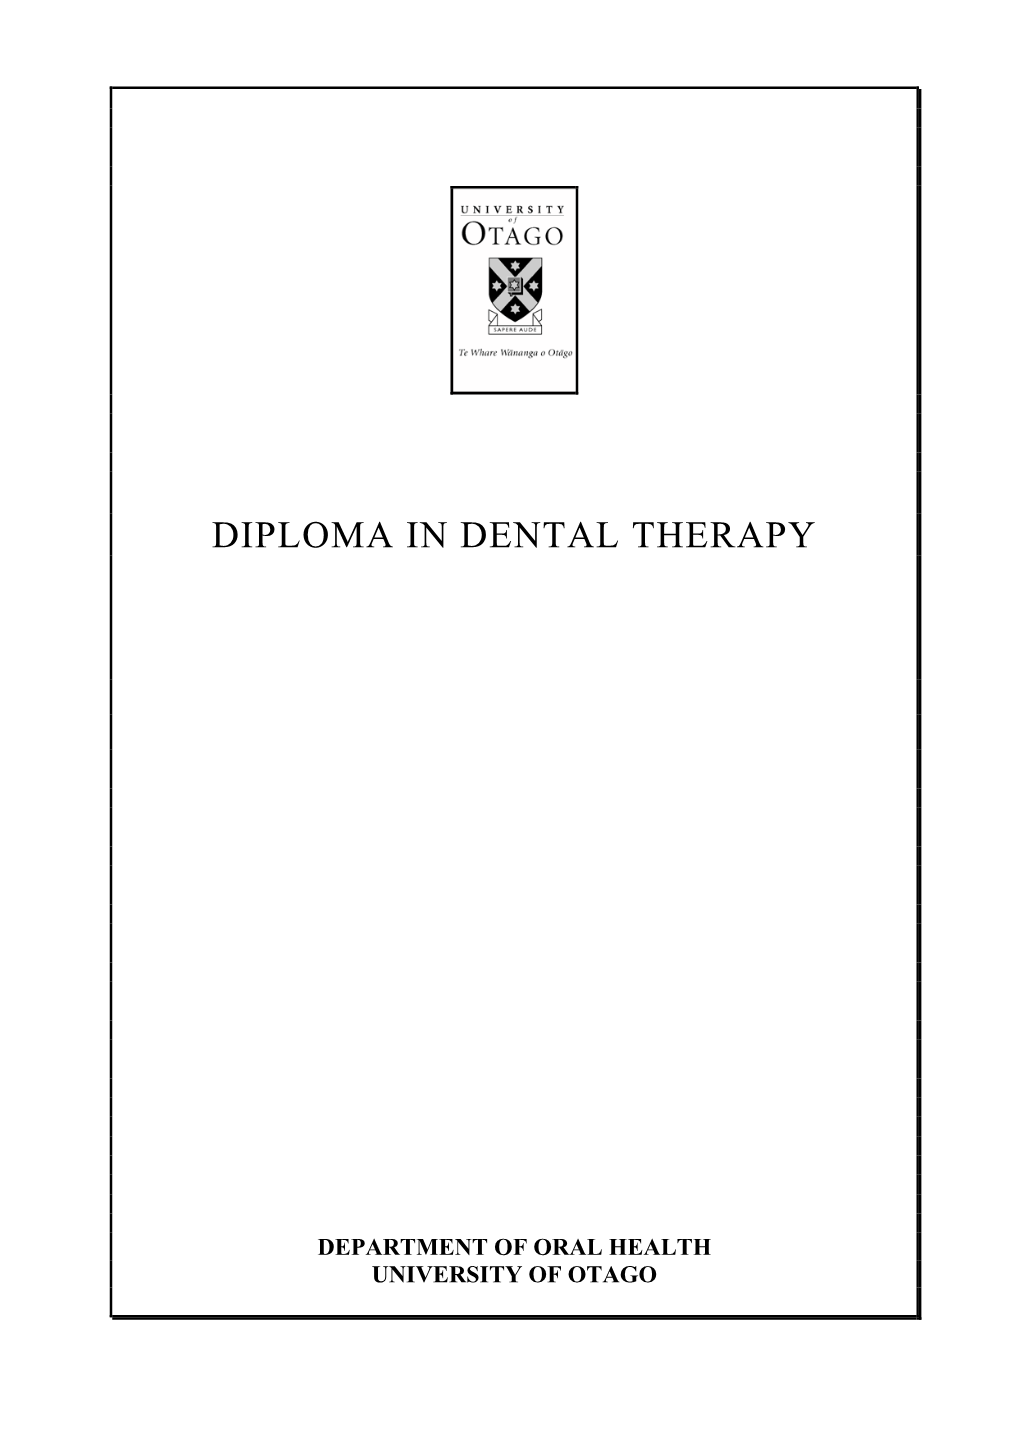 Diploma in Dental Therapy